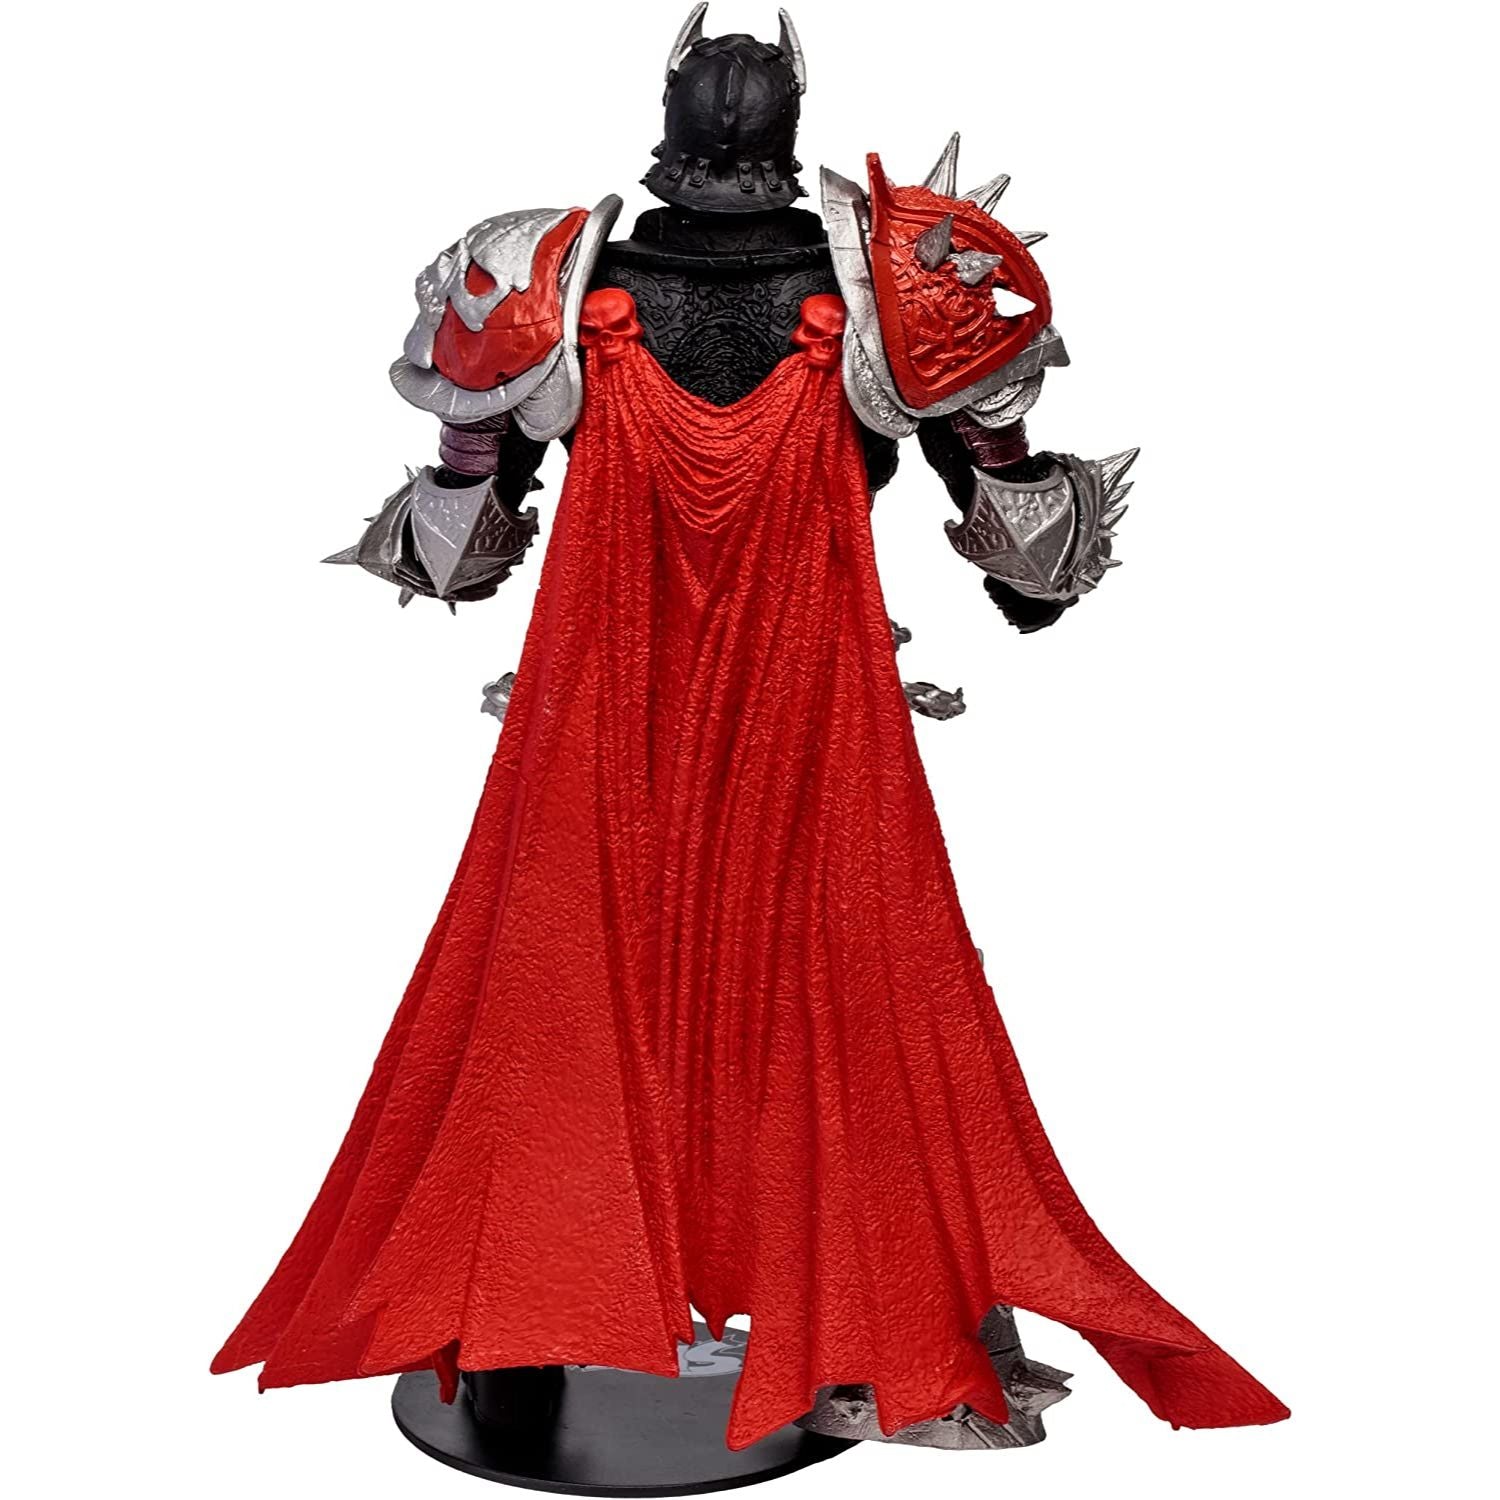 Spawn Wave 5 Medieval Spawn 7-Inch Scale Action Figure - Heretoserveyou